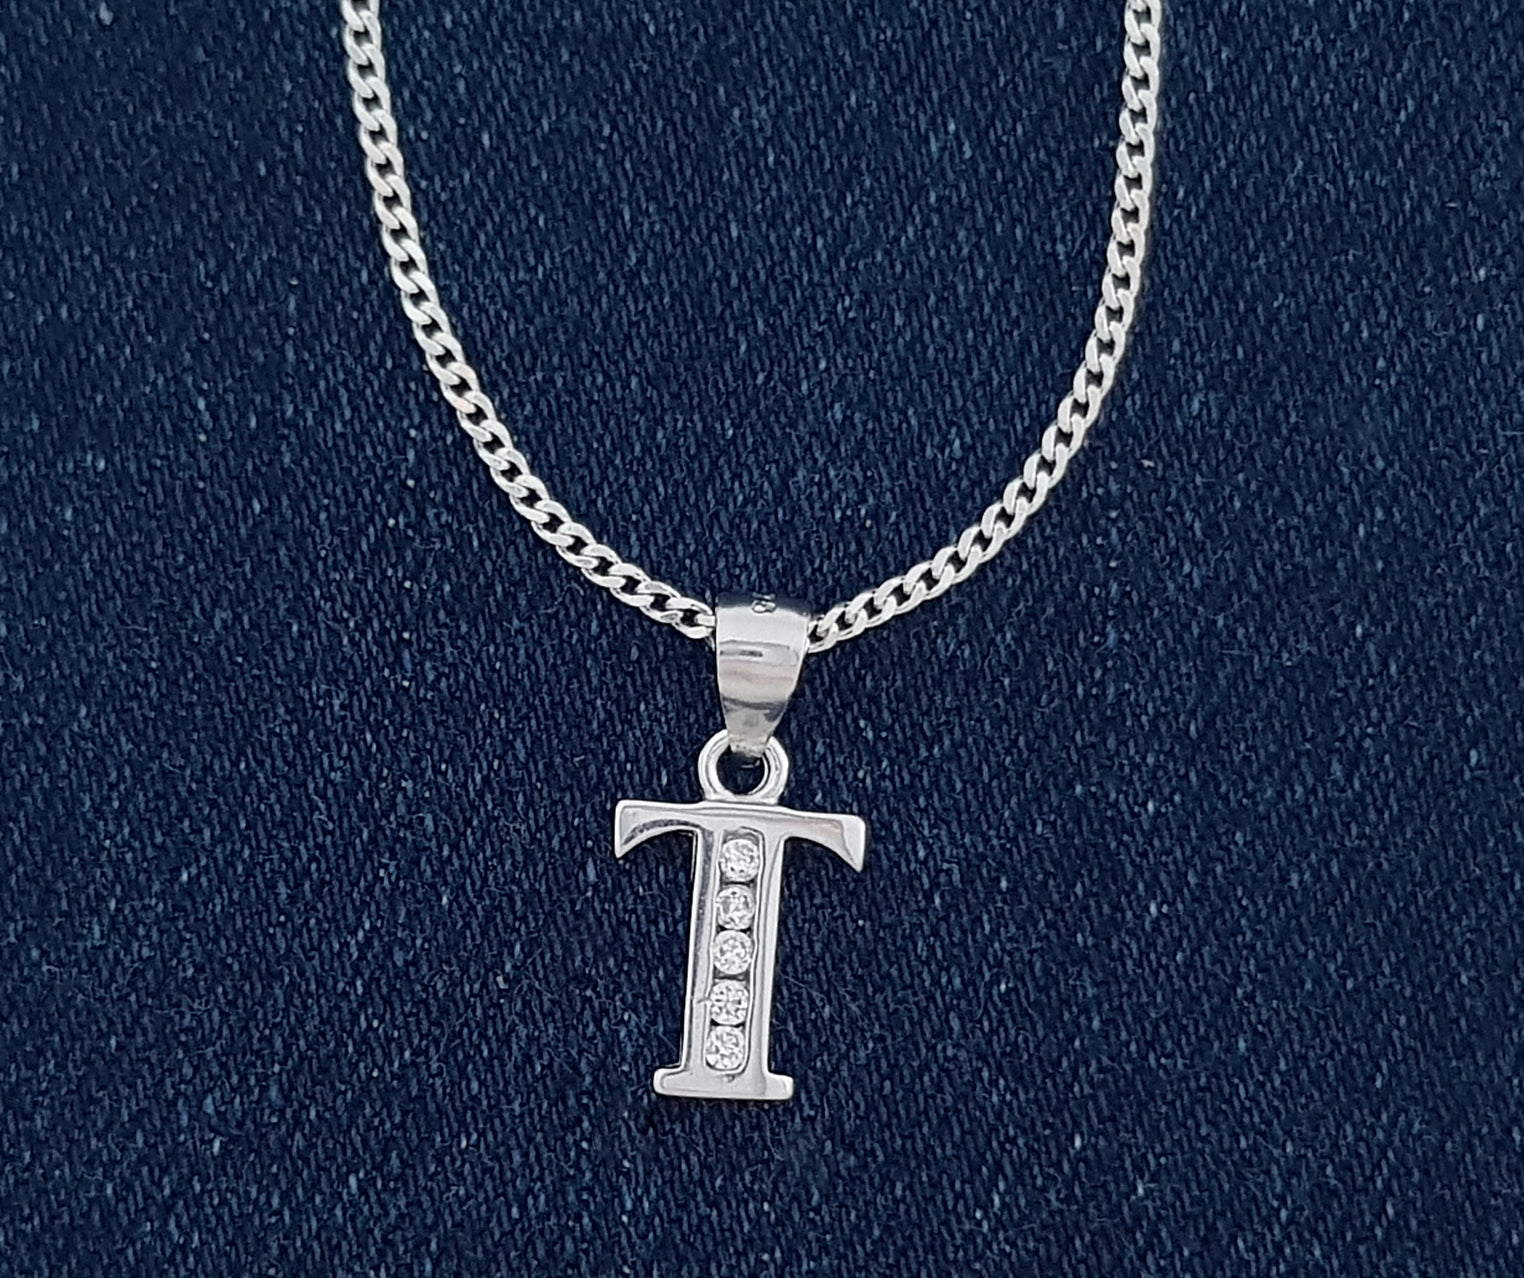 Sterling Silver Initial with Cubic Zirconia Stones- "T" Initial or Letter